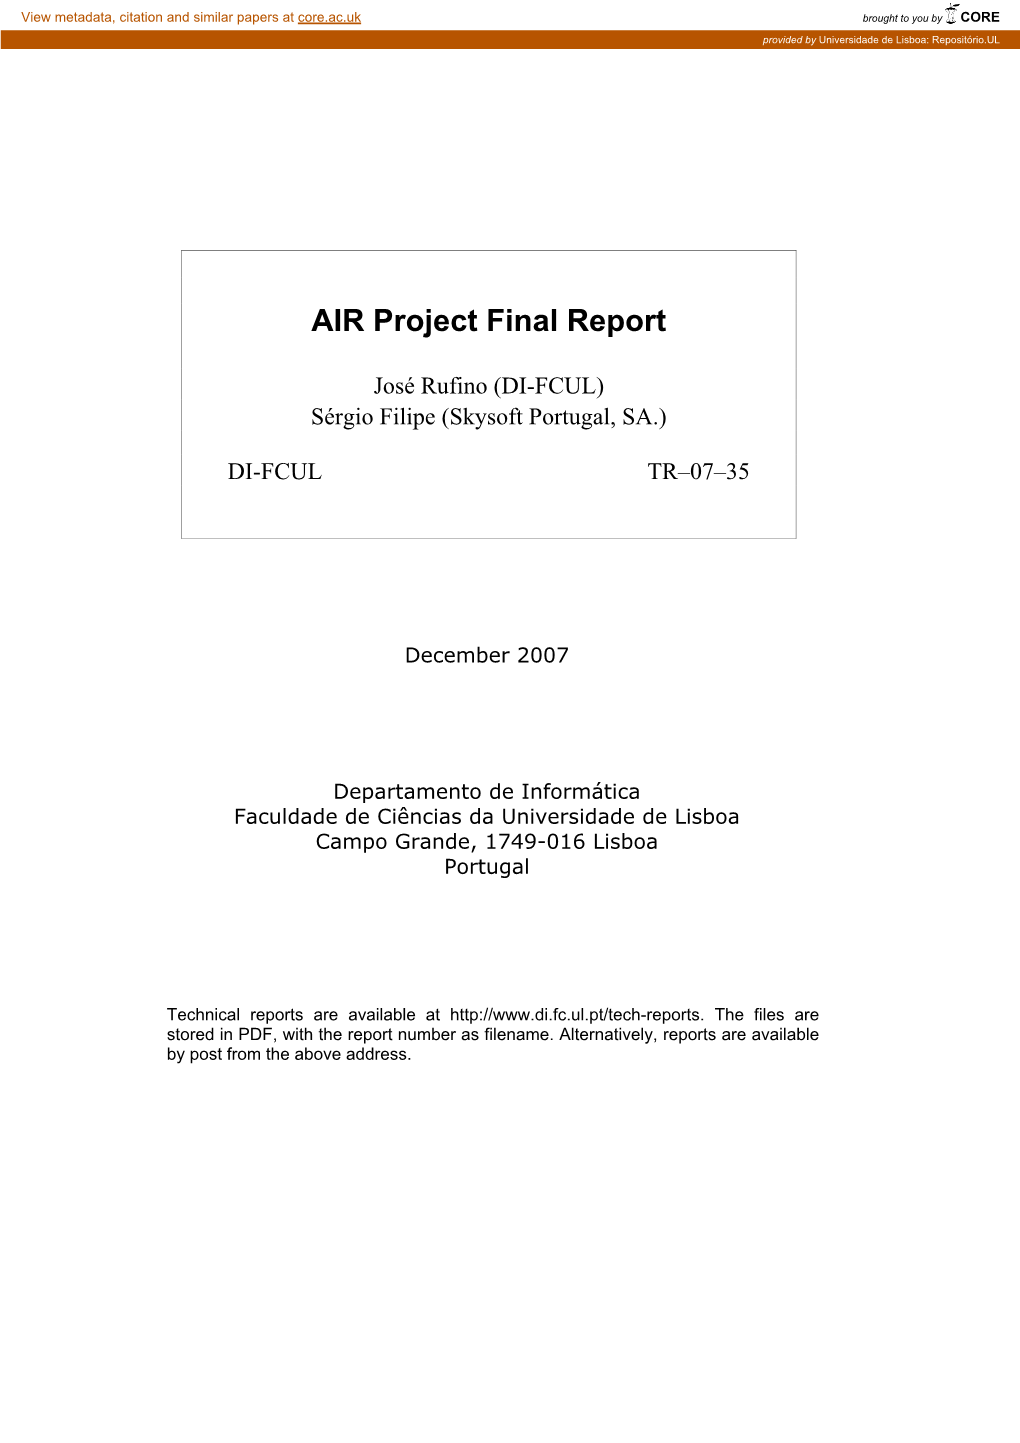 AIR Project Final Report